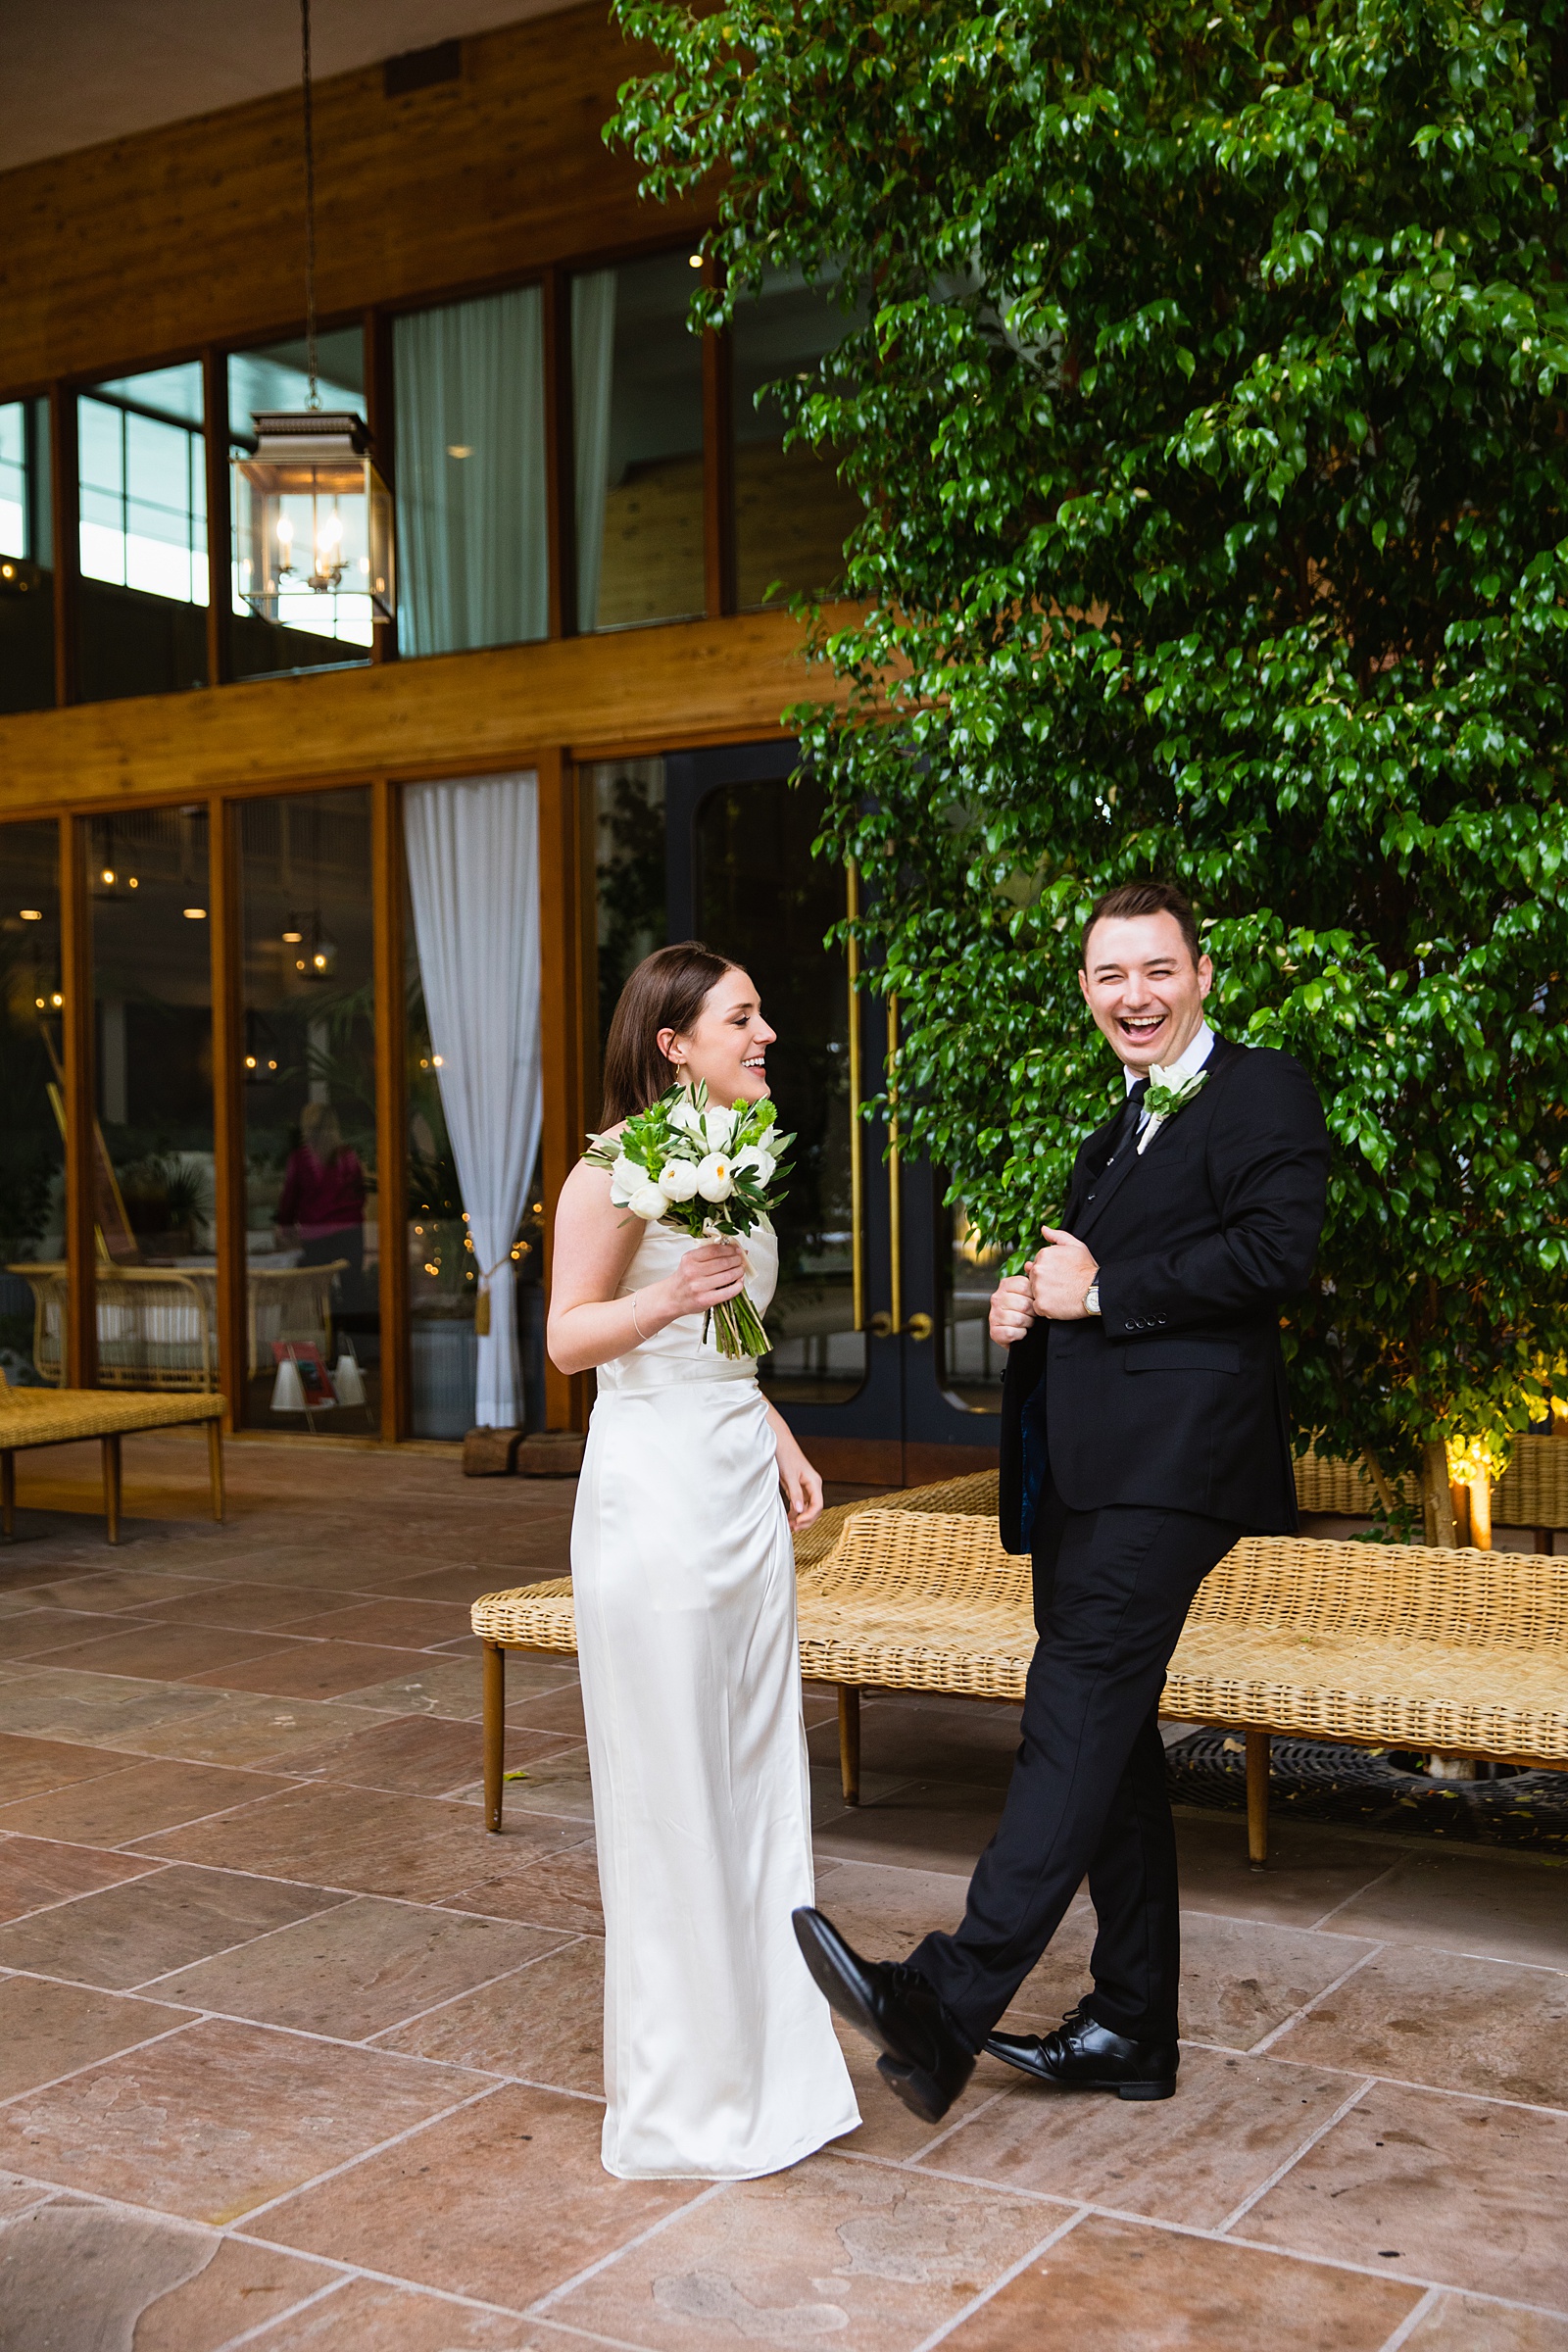 Bride & Groom's first look at The Scott by Arizona wedding photographer PMA Photography.